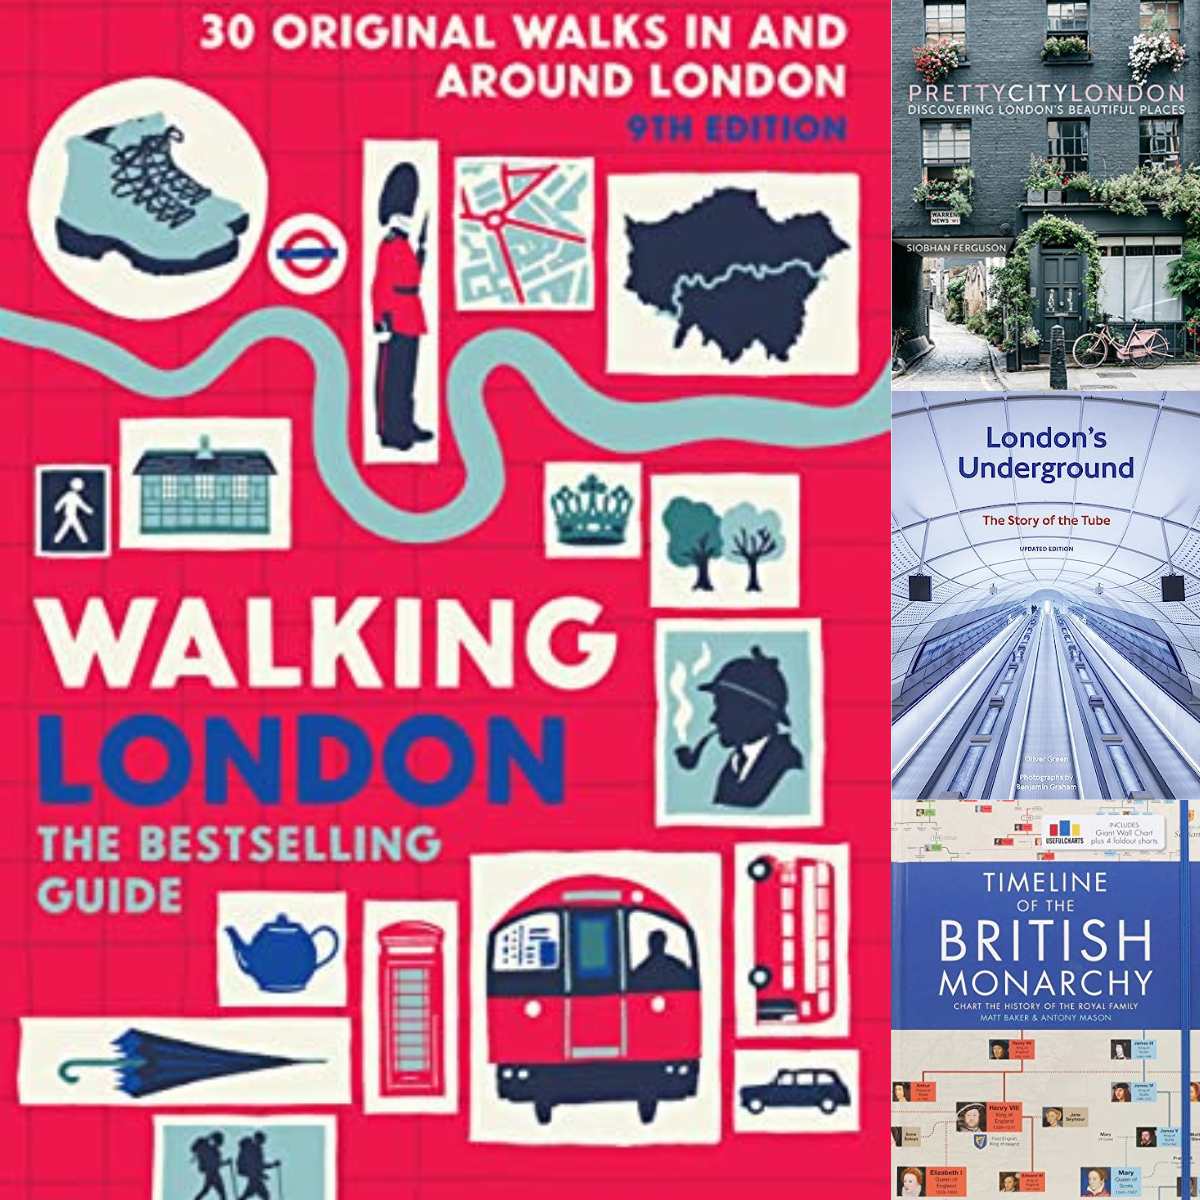 The photo collage shows 4 book covers about london.